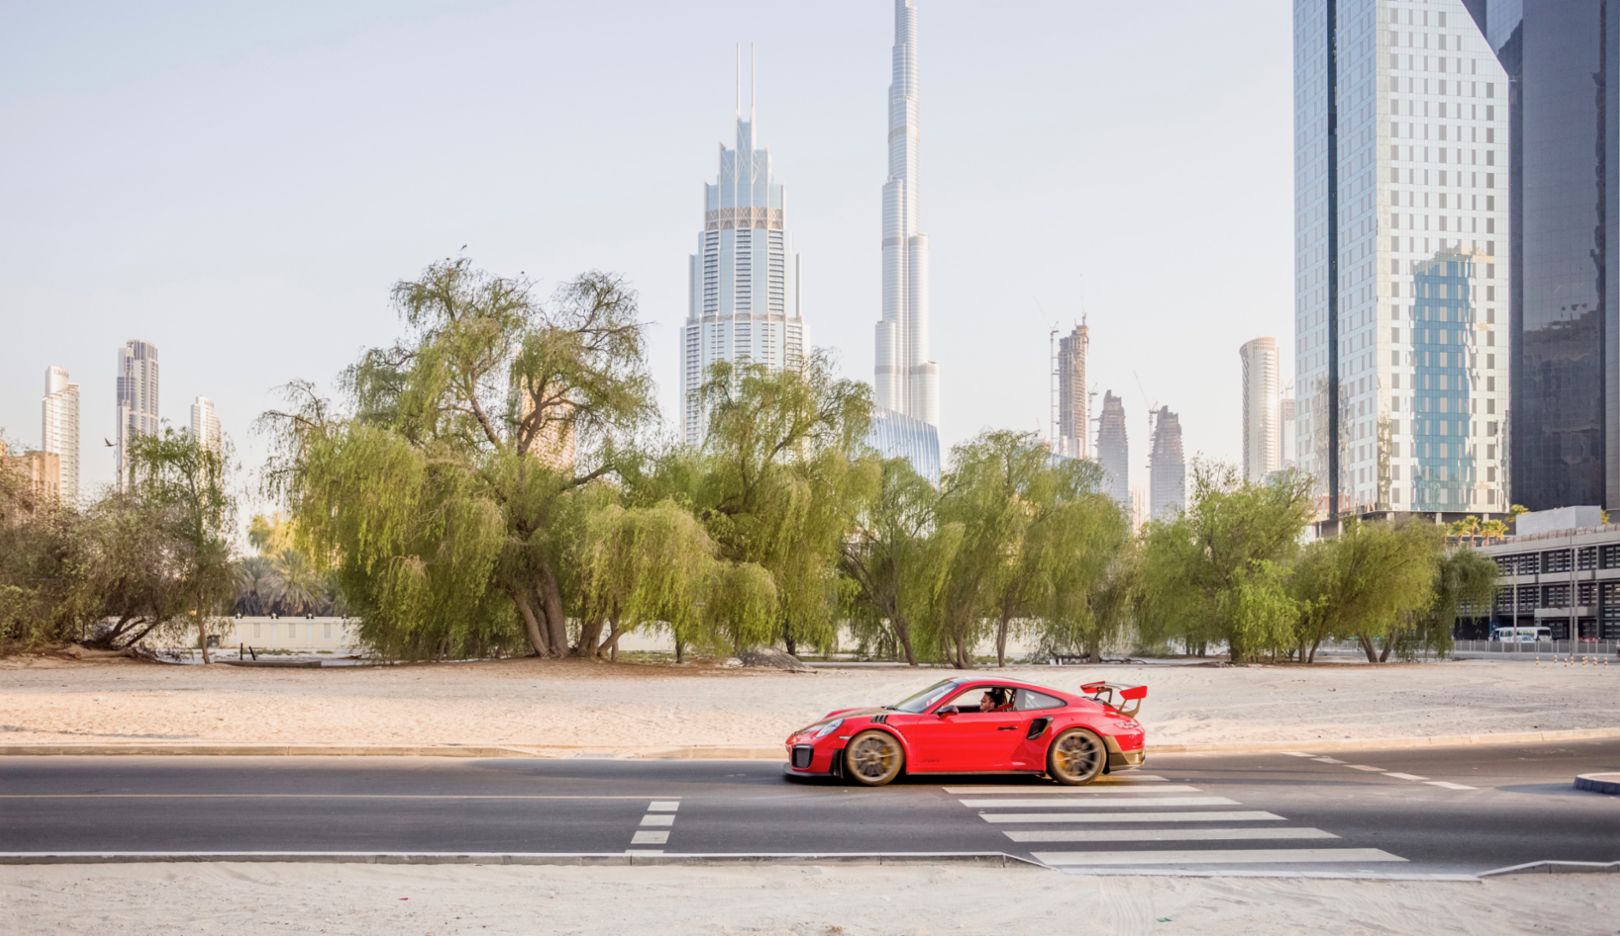 No traffic jams and the lanes are as wide as racetracks: The central financial district of Dubai offers plenty of open space for the Porsche 911 GT2 RS. But of course, in city traffic, Karim Al Azhari bridles his passion for driving.